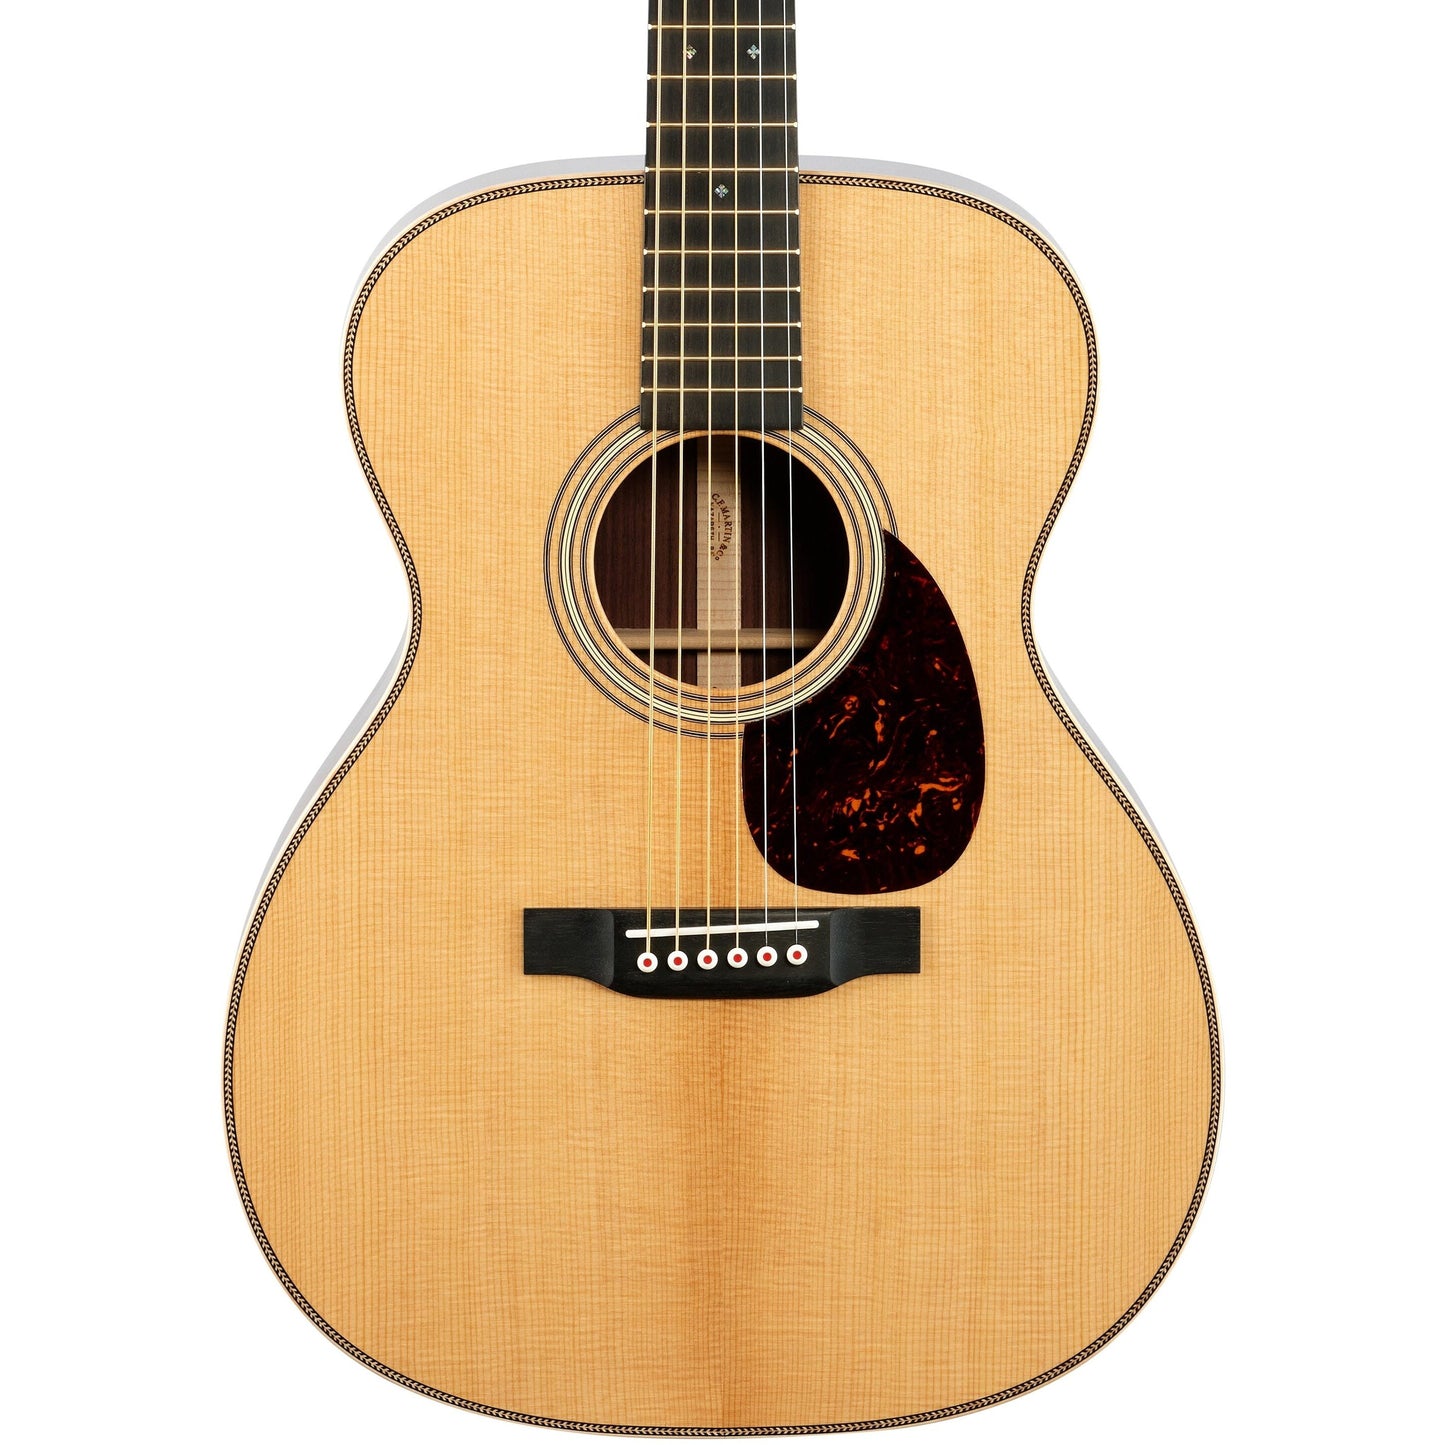 Martin OM-28 Modern Deluxe Orchestra Acoustic Guitar - Body